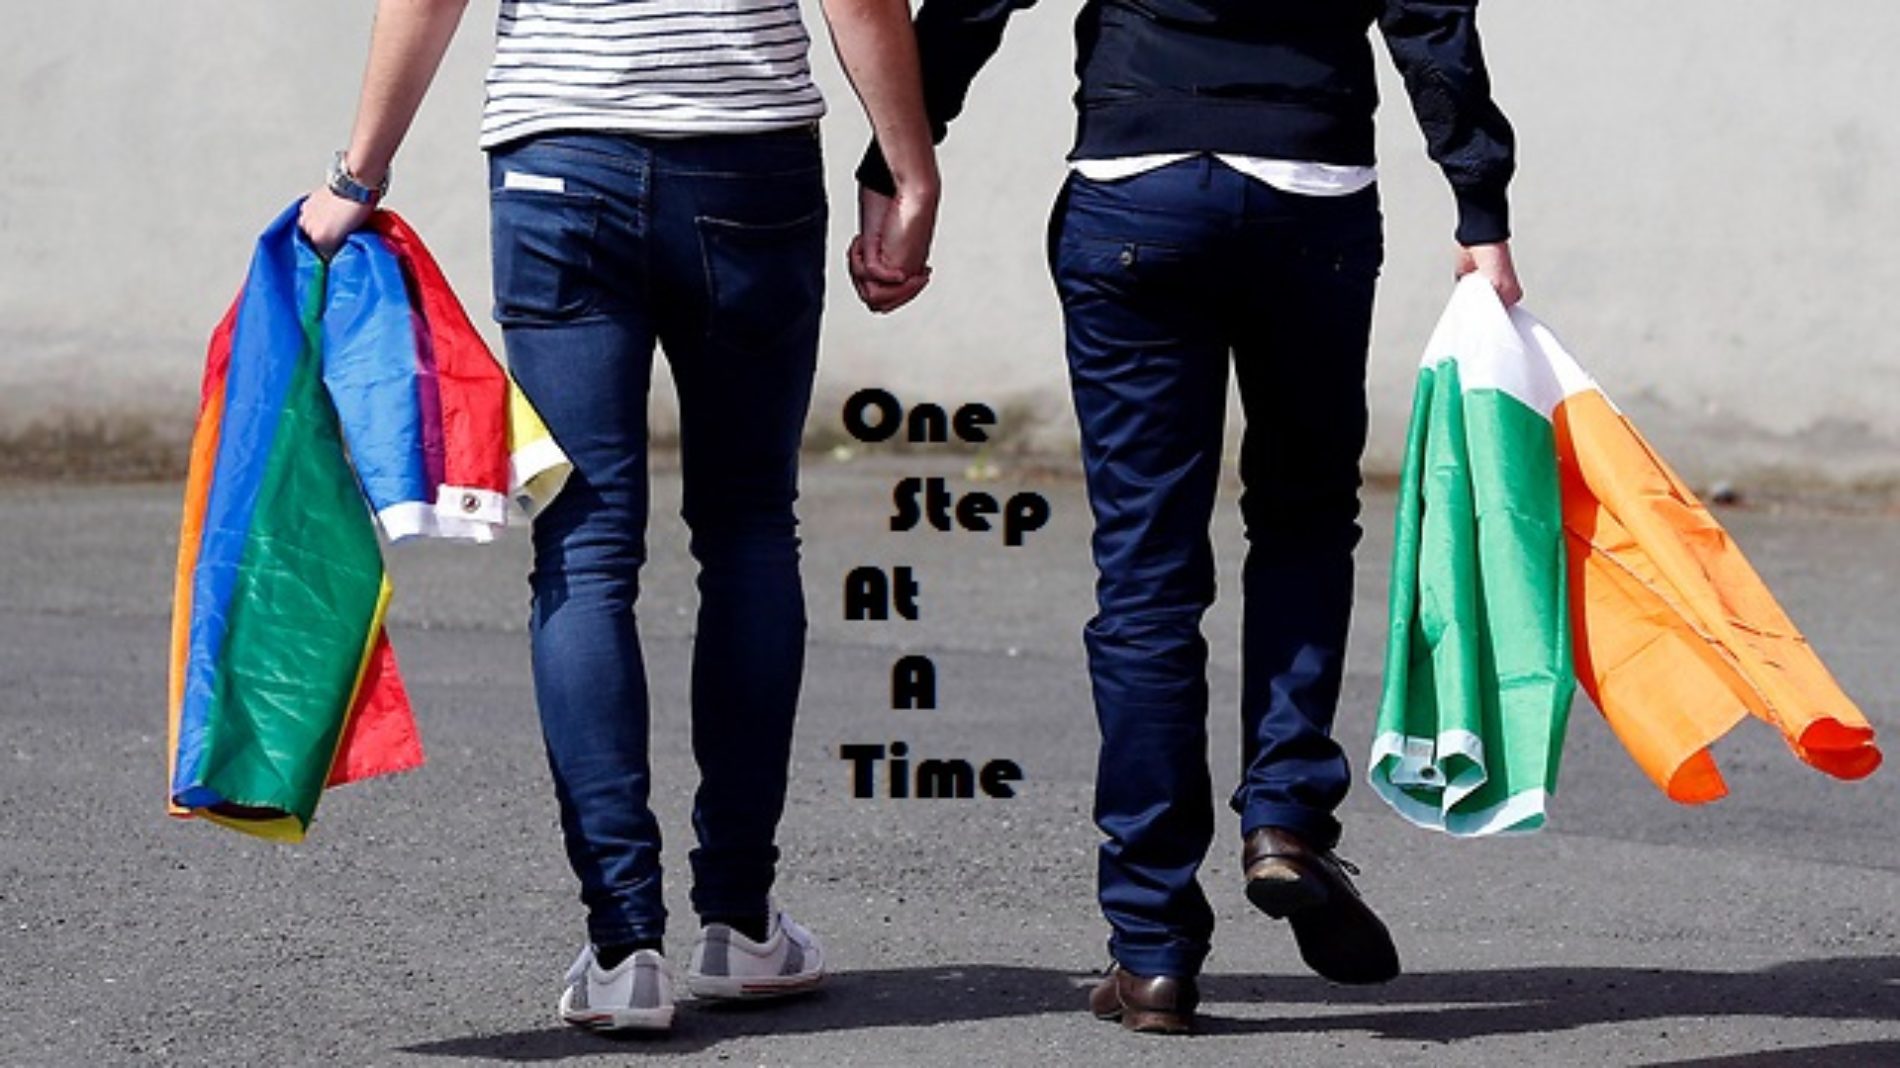 ONE STEP AT A TIME (Episode 2)